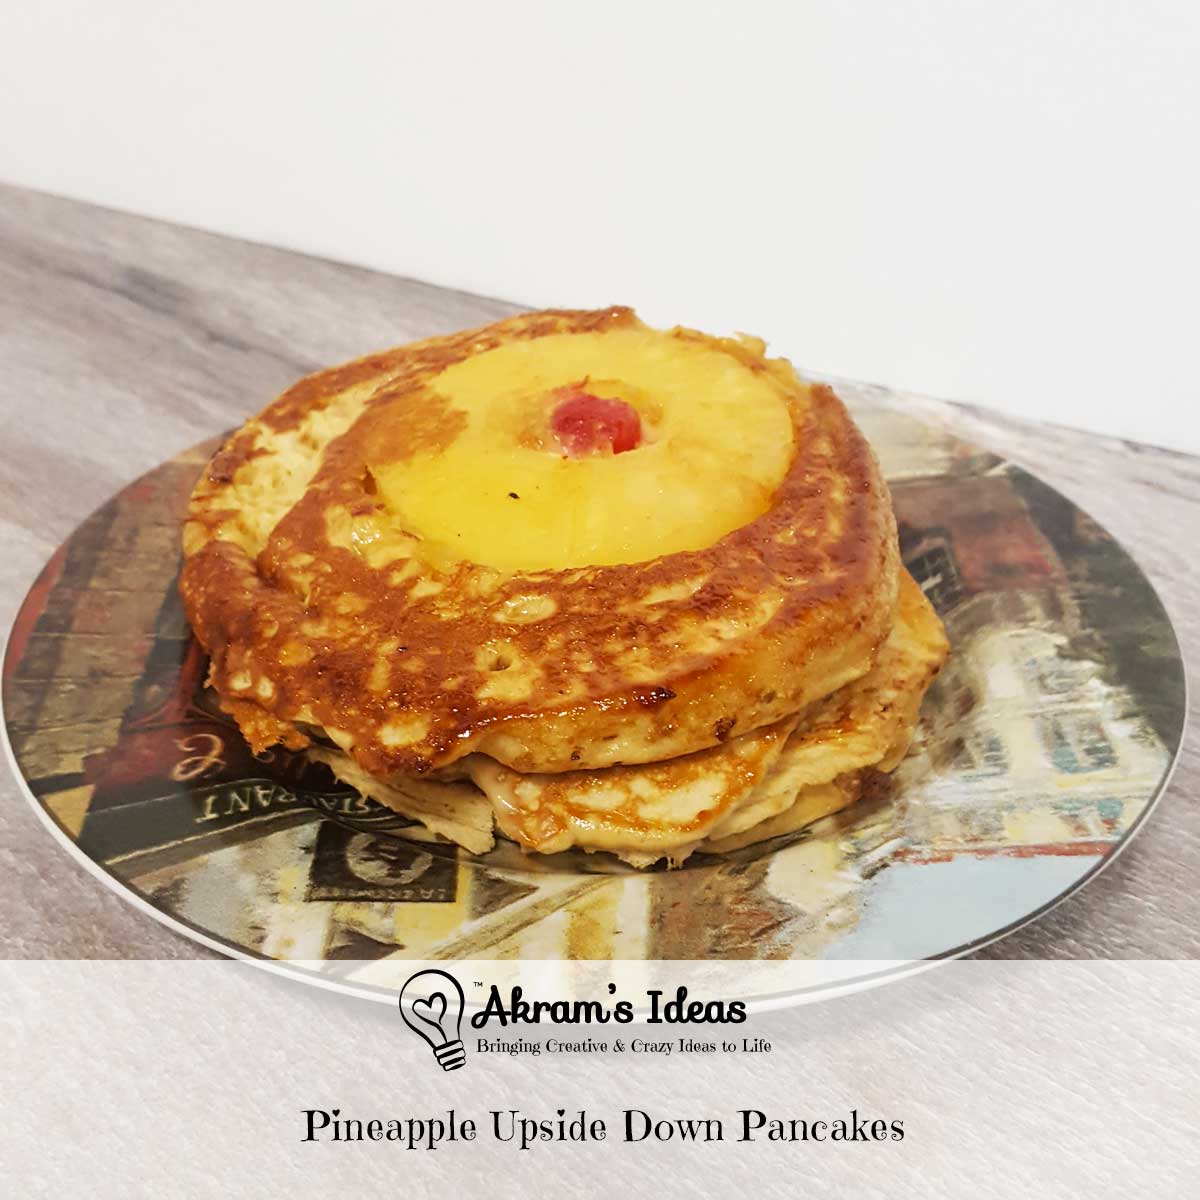 Learn how to make these golden brown sugar Pineapple Upside Down Pancakes perfect for a springtime brunch.